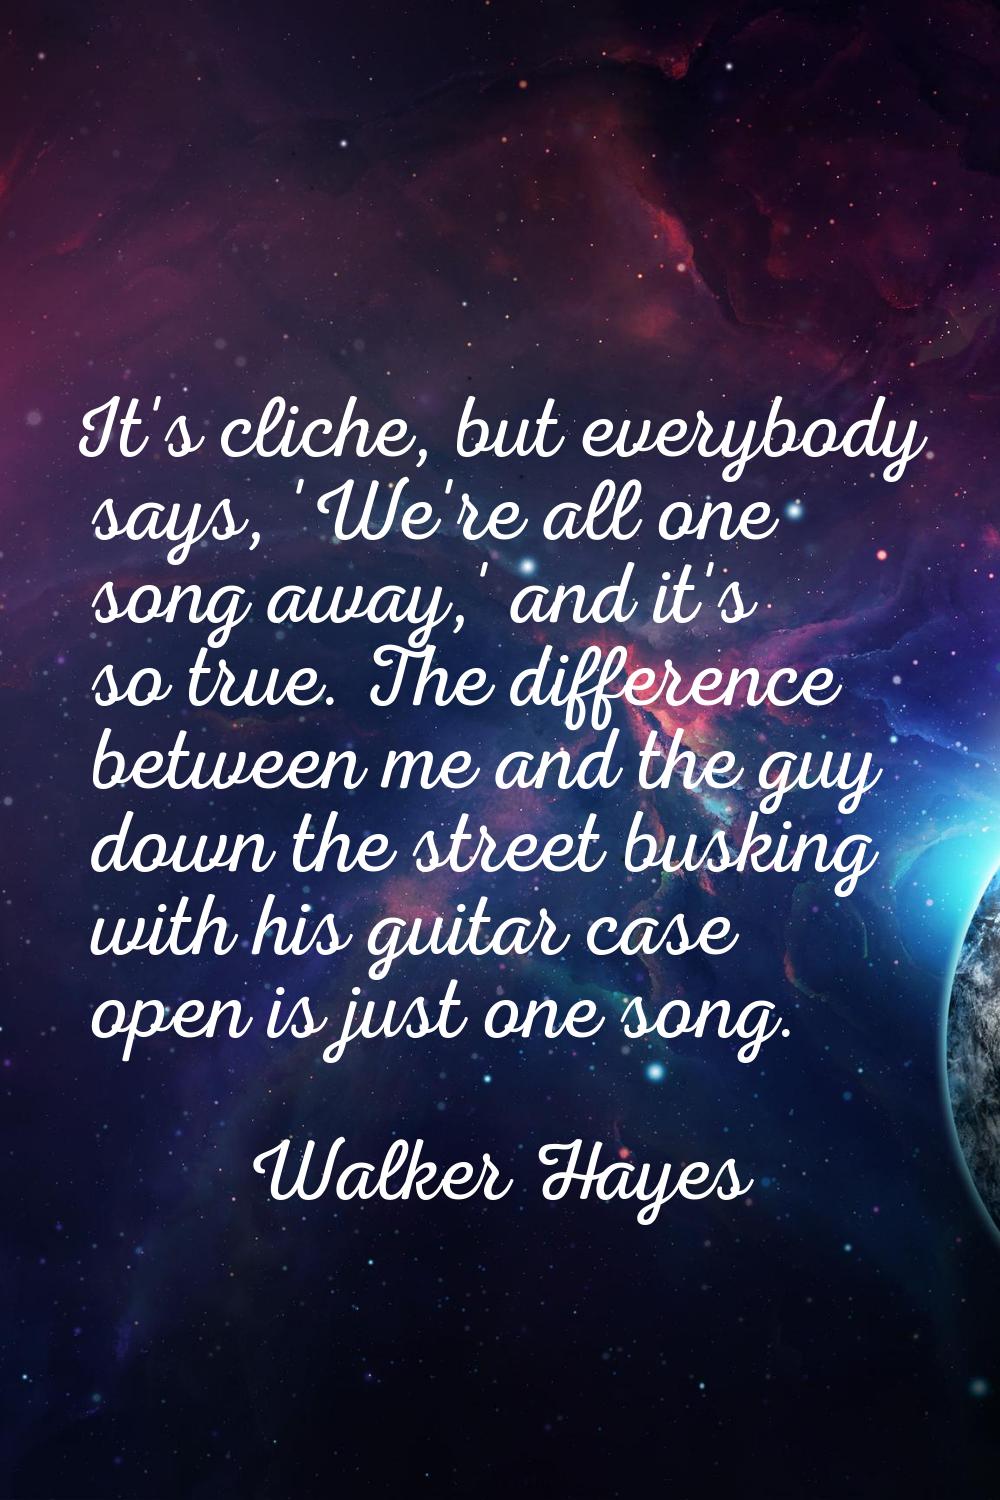 It's cliche, but everybody says, 'We're all one song away,' and it's so true. The difference betwee